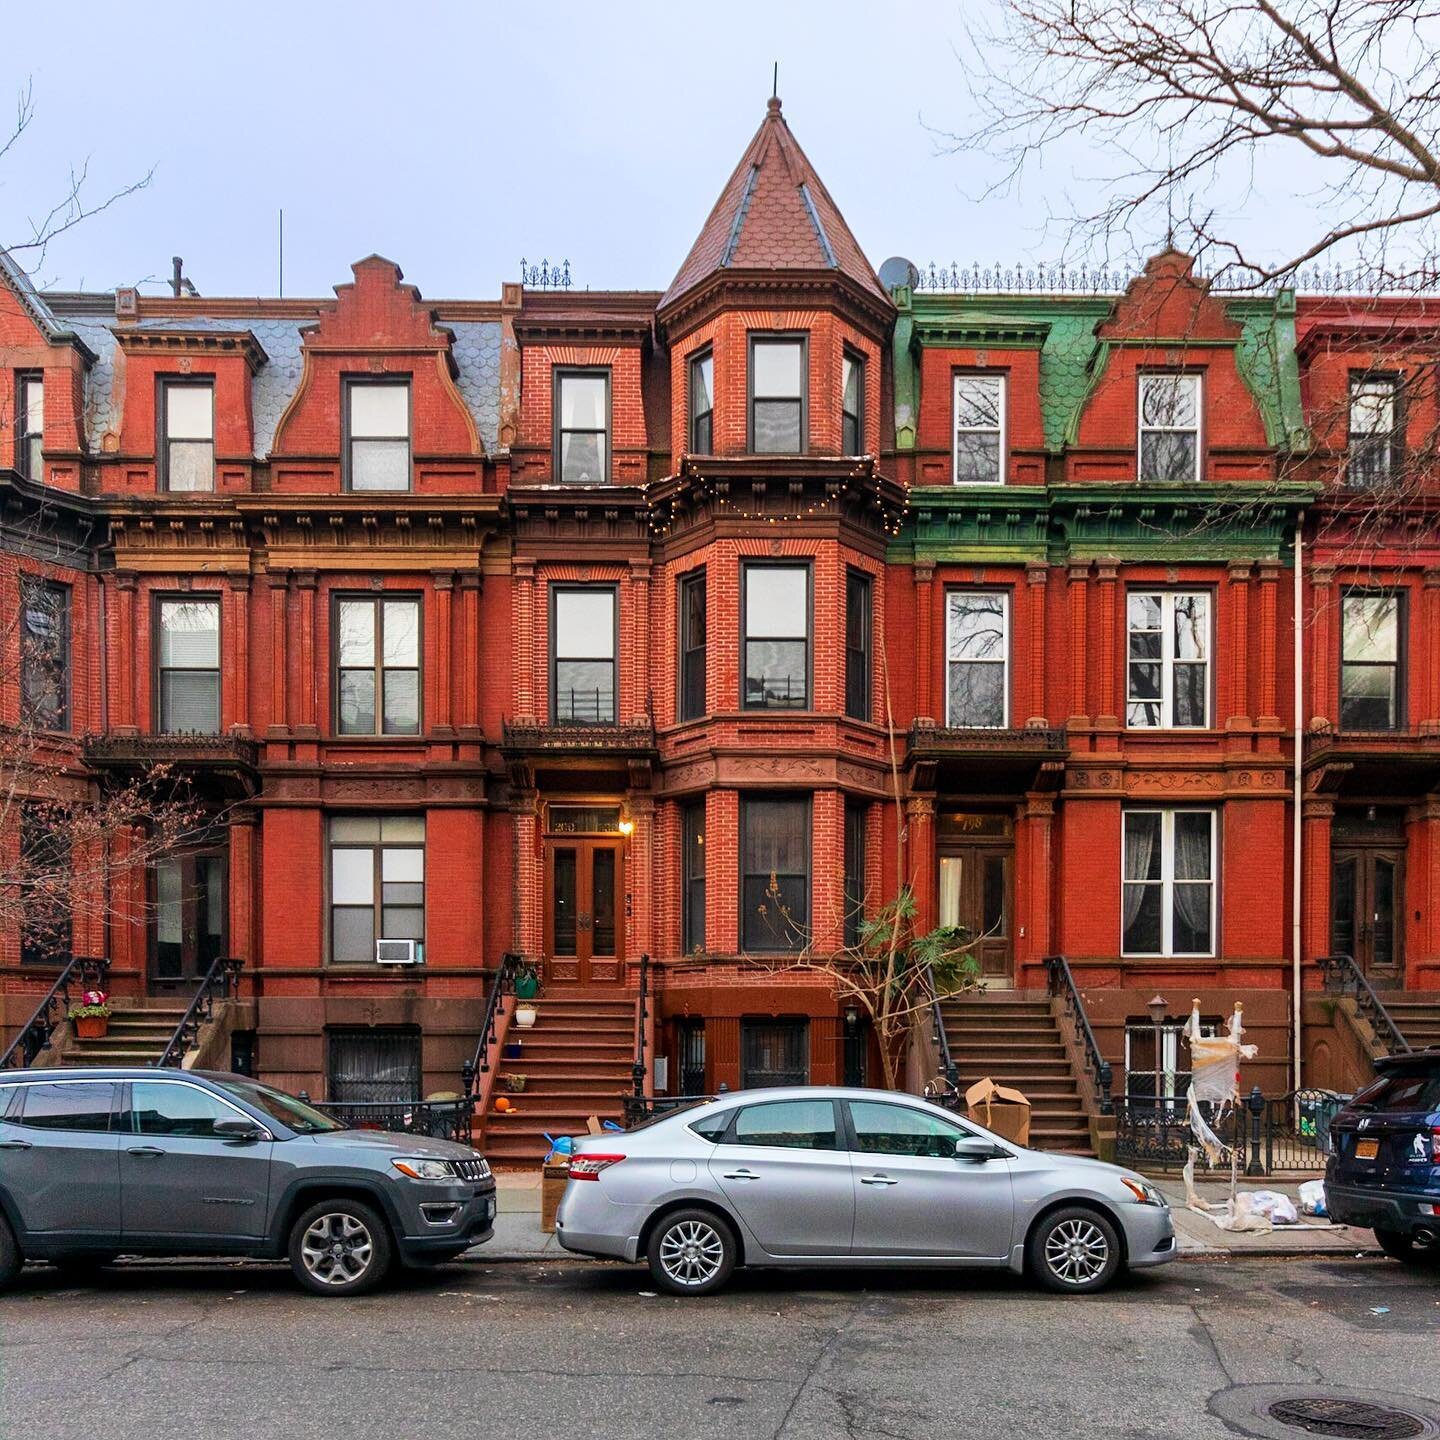 This group of row houses on Hancock Street in Bed-Stuy was built for developer George H. Stone. Stone owned and developed many buildings in this area in the 1870s and 1880s, these were built in 1884. For reference, most of the buildings in this part 